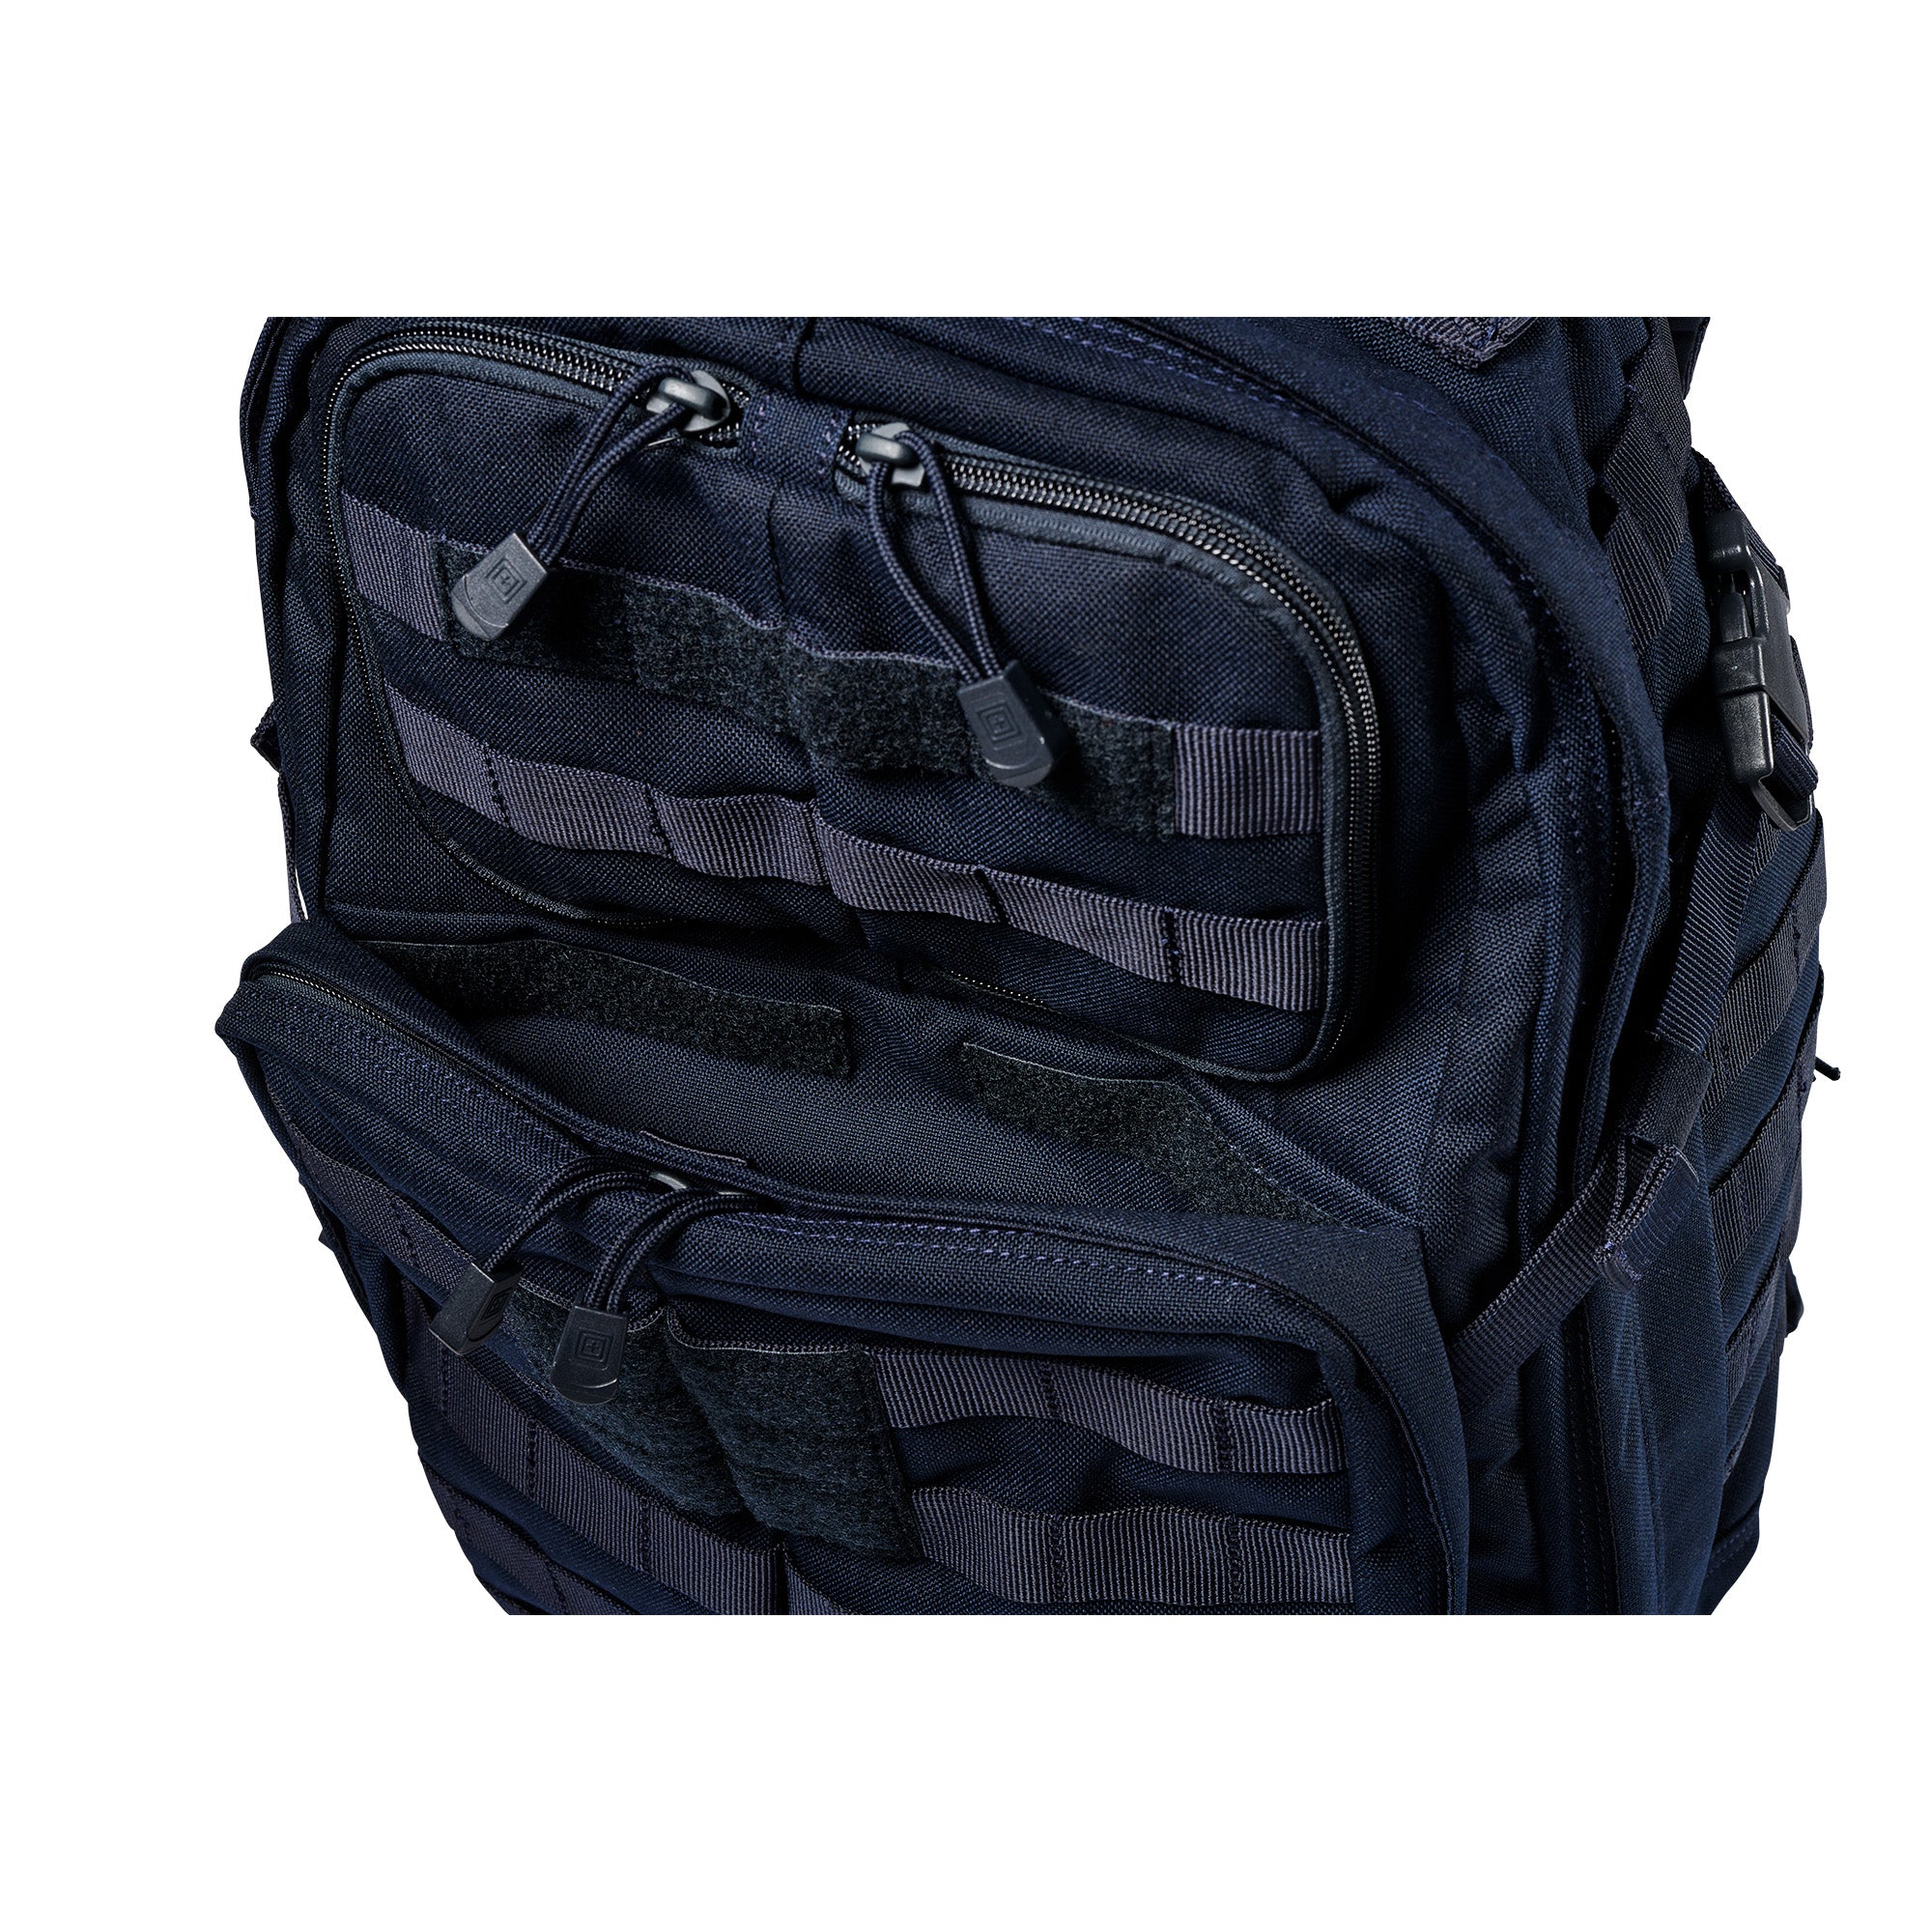 5.11 Tactical Rush 24 Backpack リュック黒-